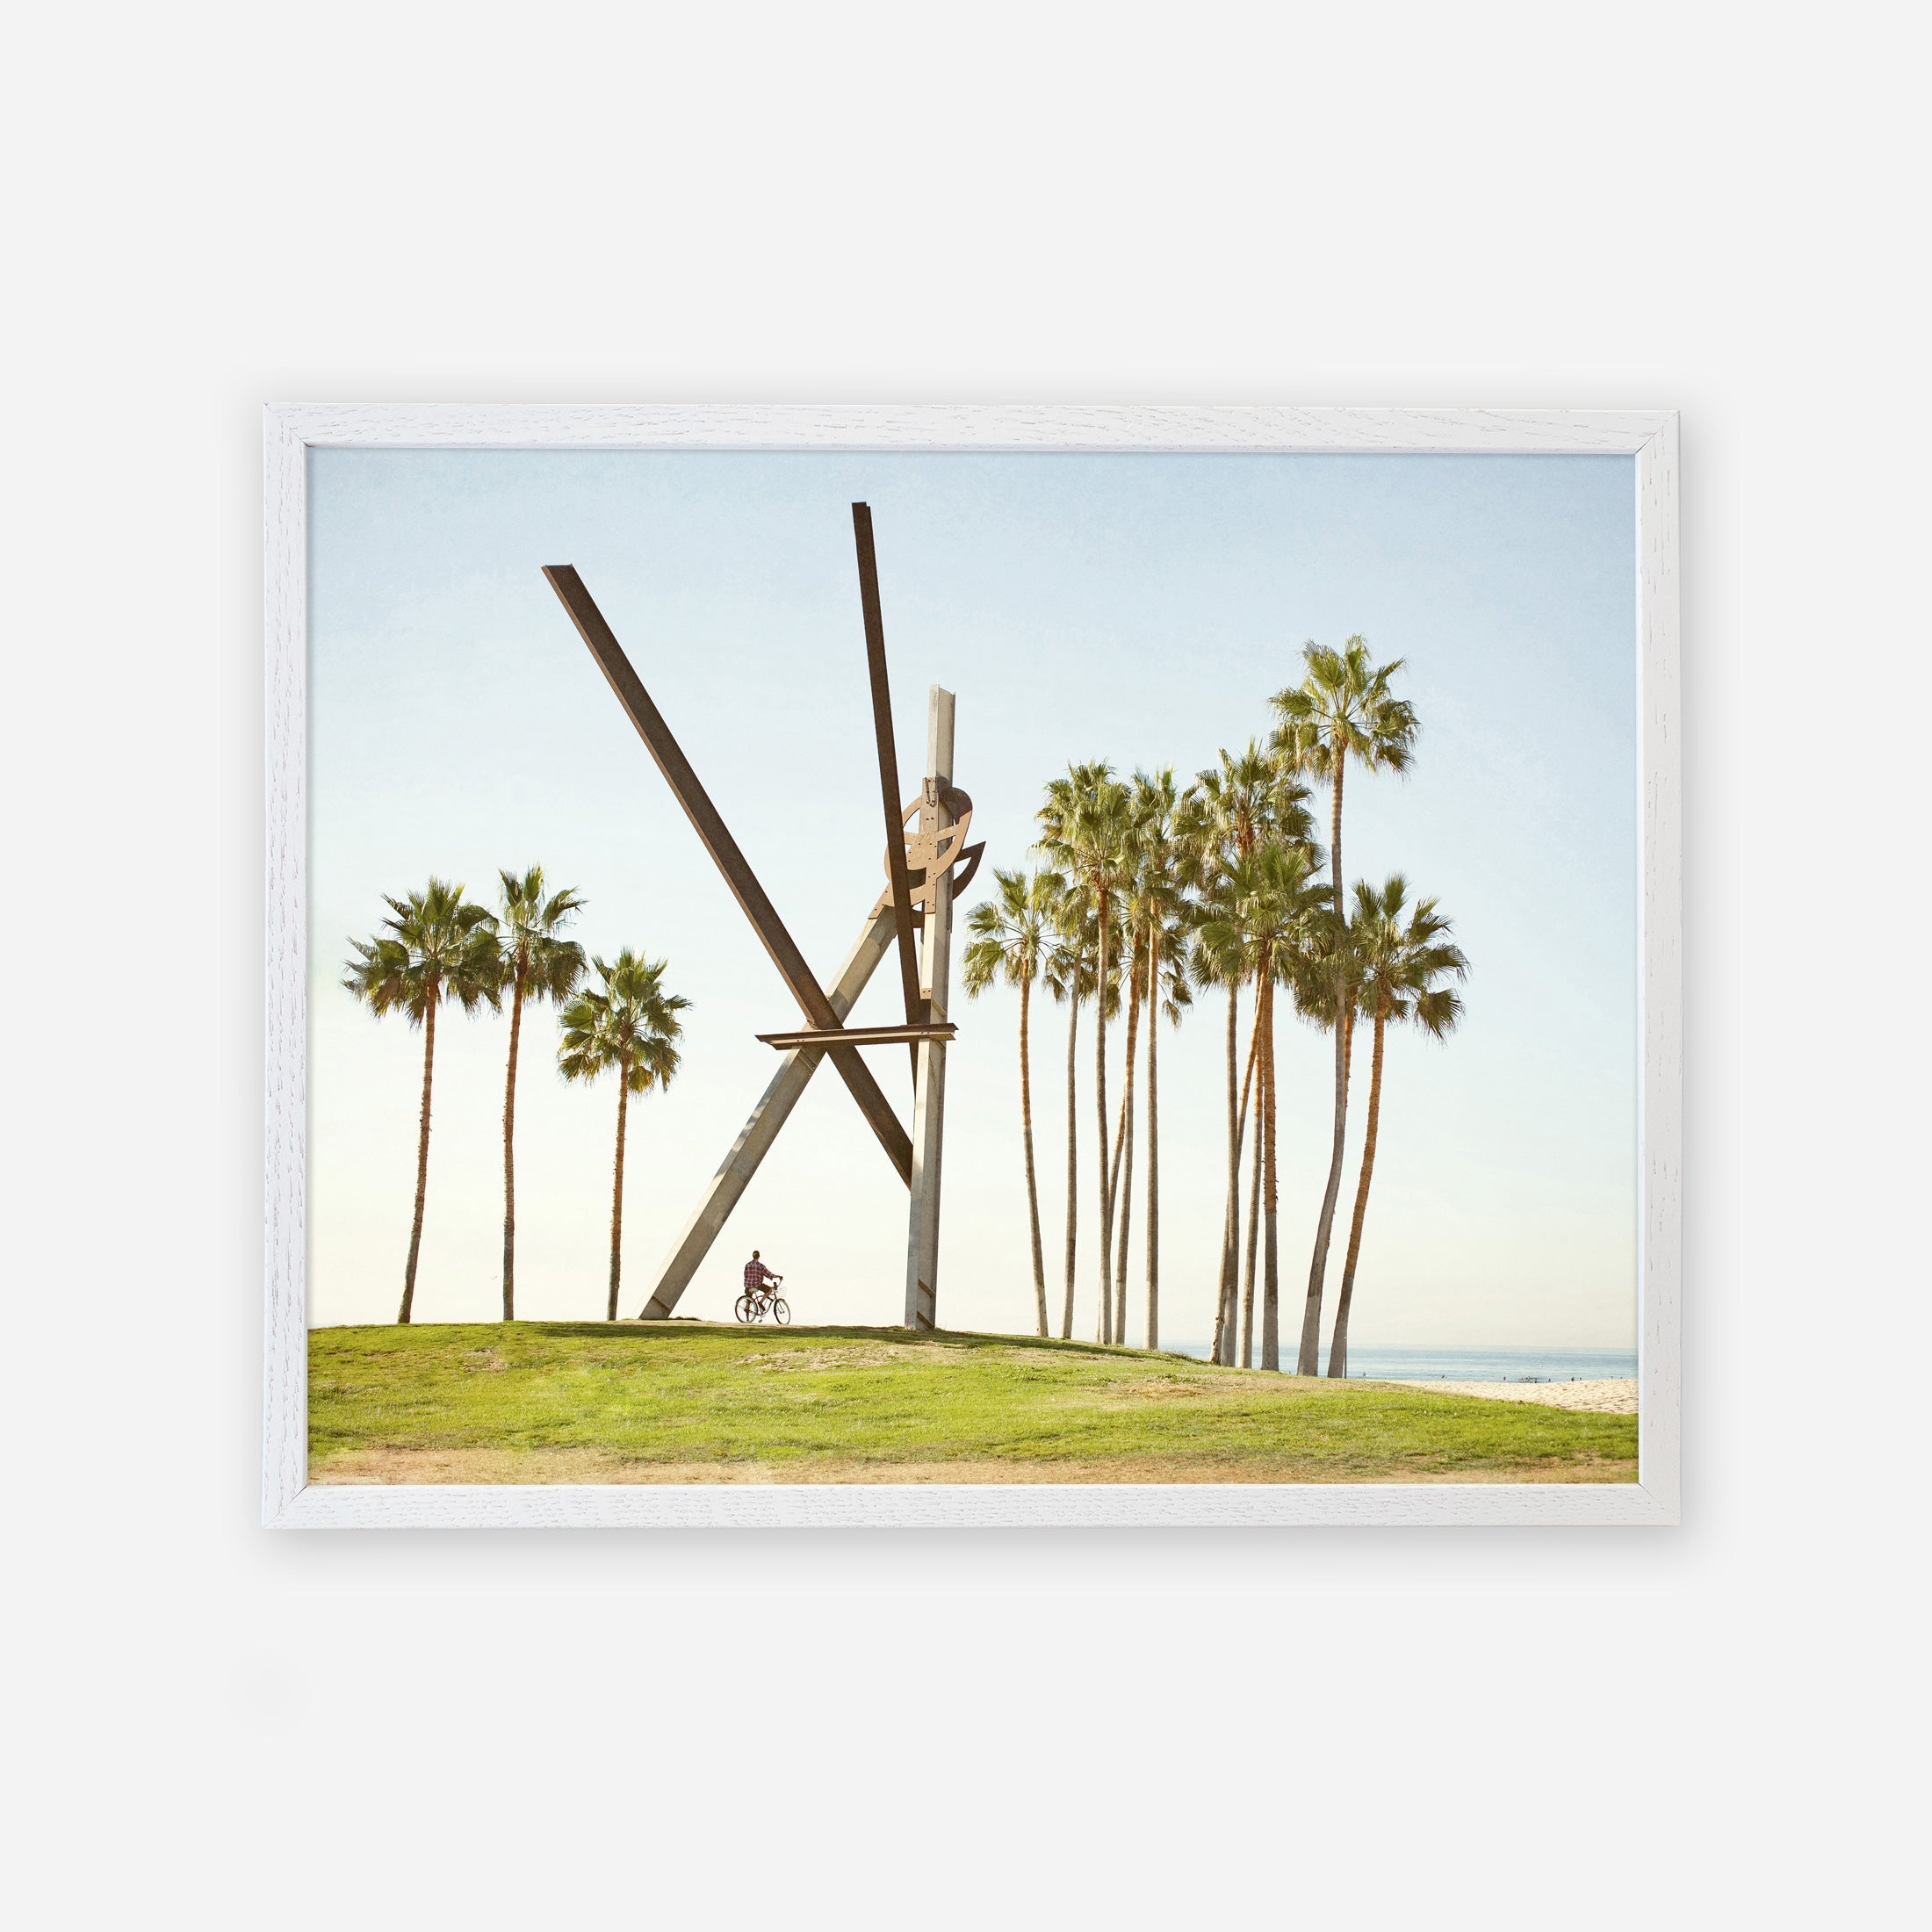 A framed photograph of the Venice Beach Landmark Sculpture, &#39;V is for Venice&#39; by Offley Green, resembling intersecting wooden beams, with tall palm trees in the background under a clear sky. This Venice Beach photography captures a cyclist riding by on a pathway.